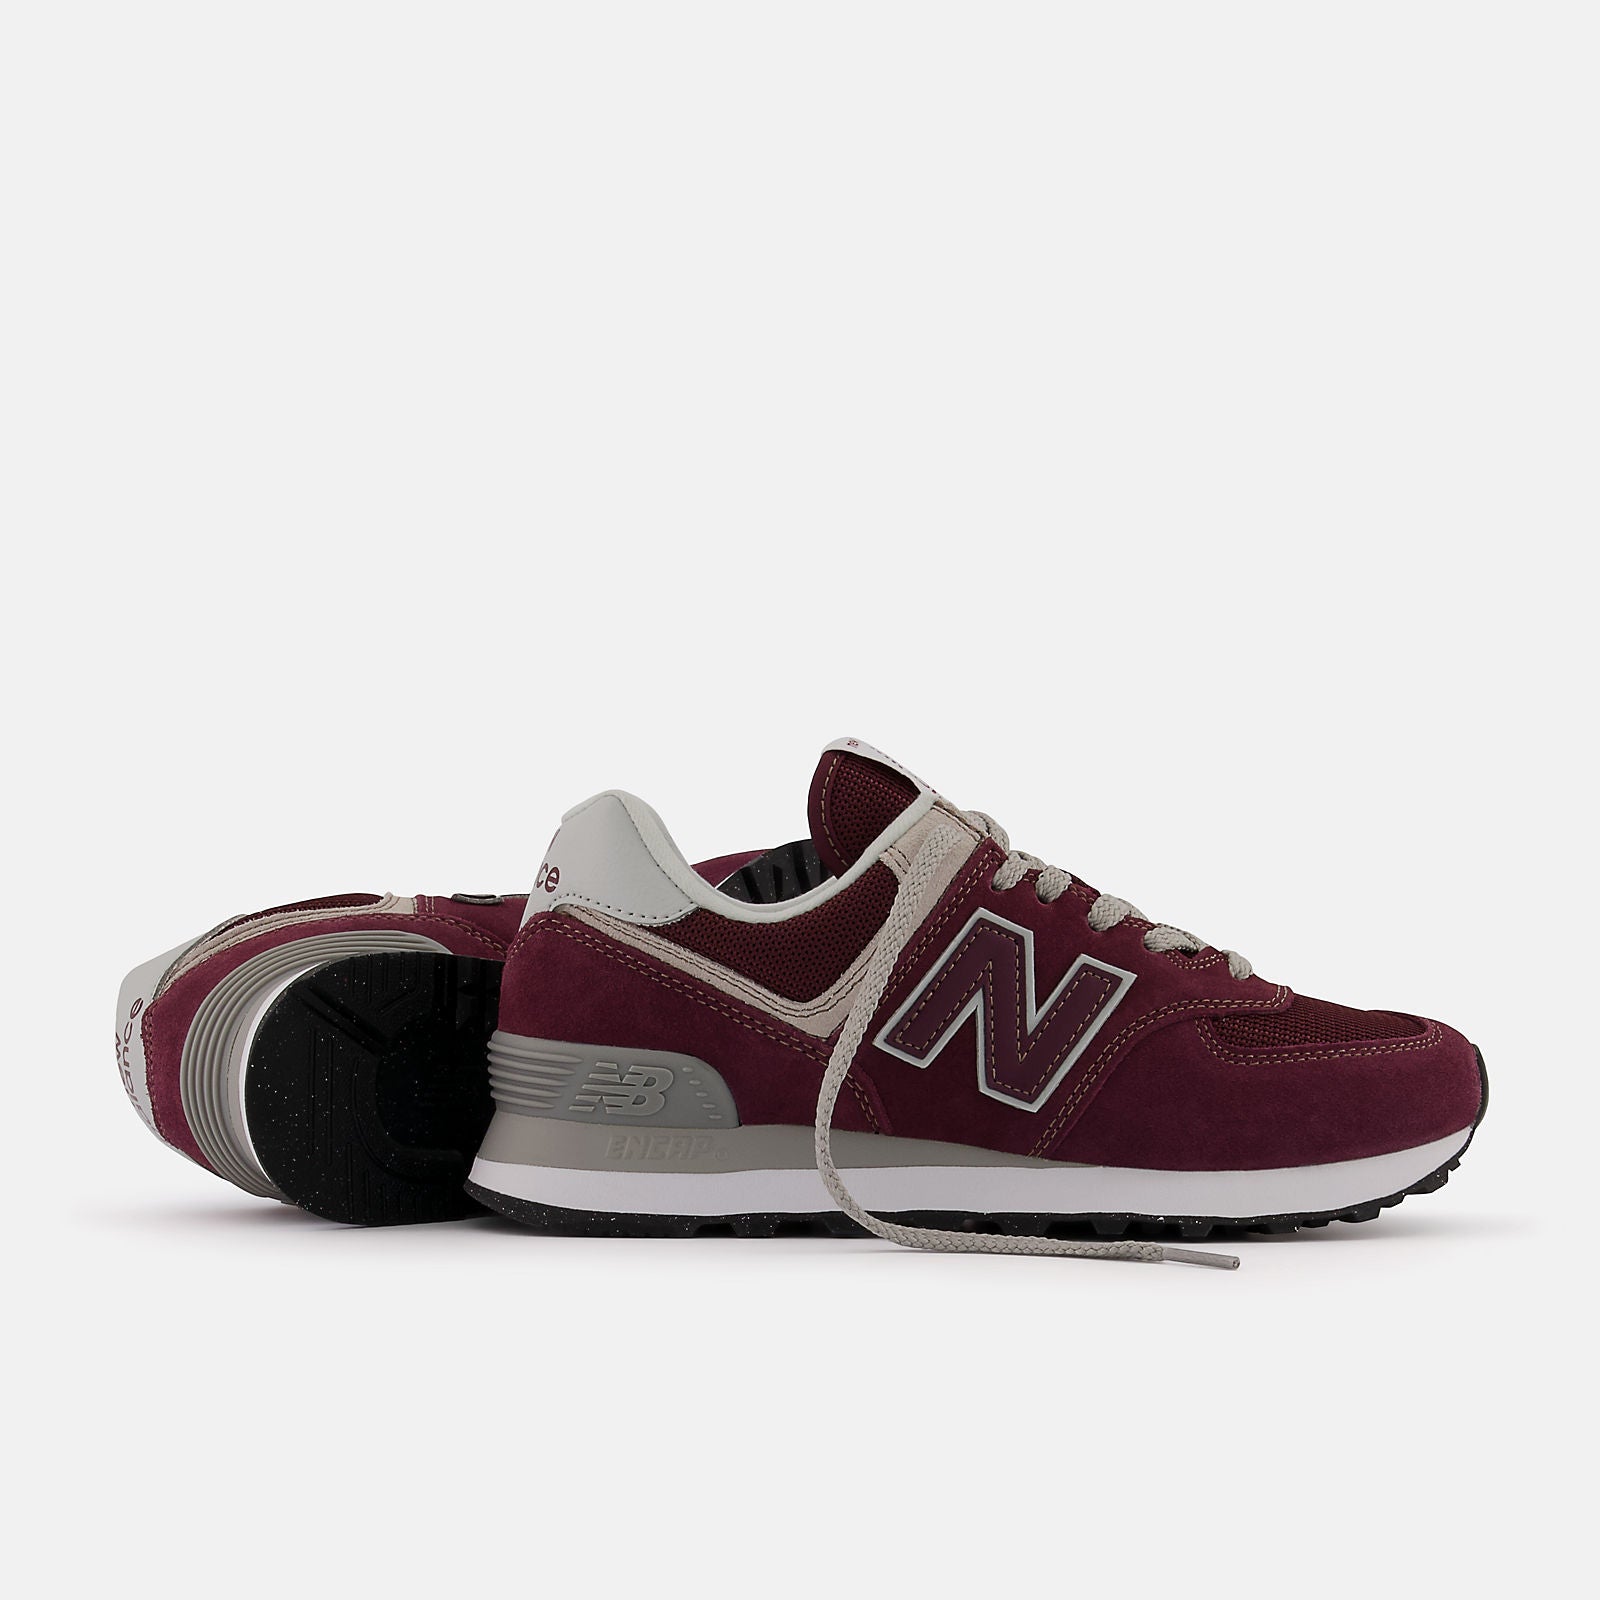 574 Burgundy with white